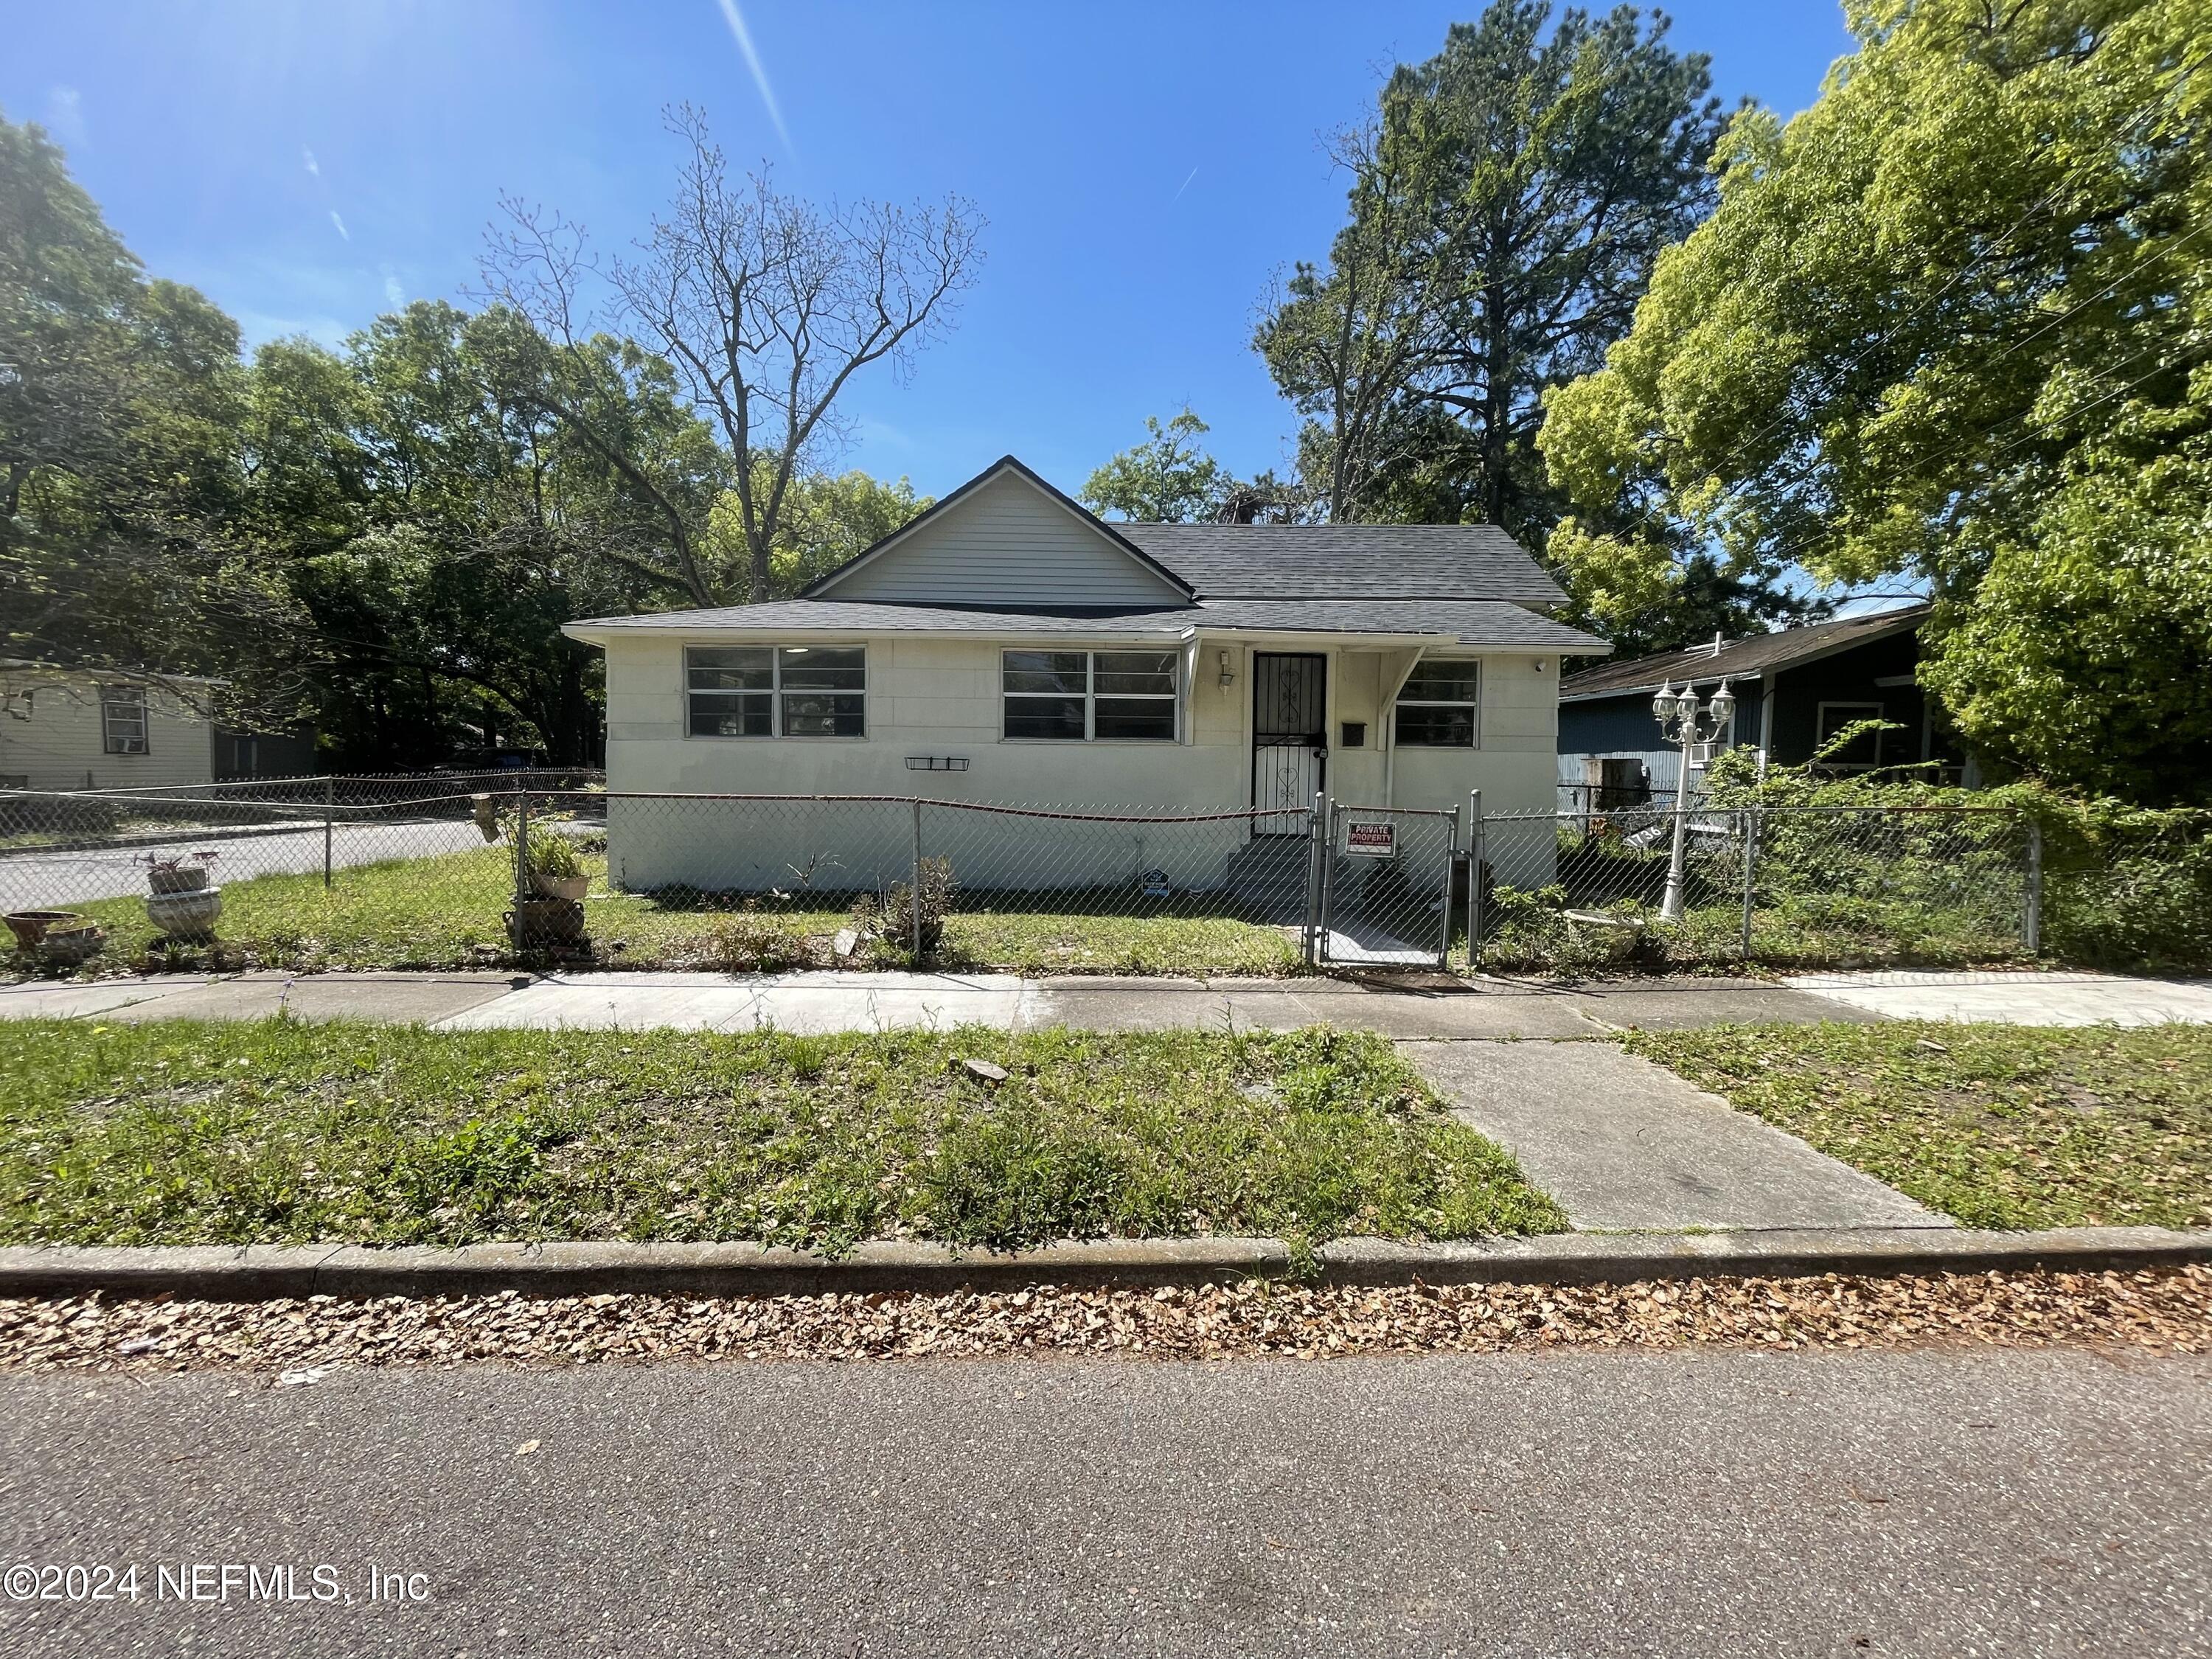 Jacksonville, FL home for sale located at 1736 W 2nd Street, Jacksonville, FL 32209